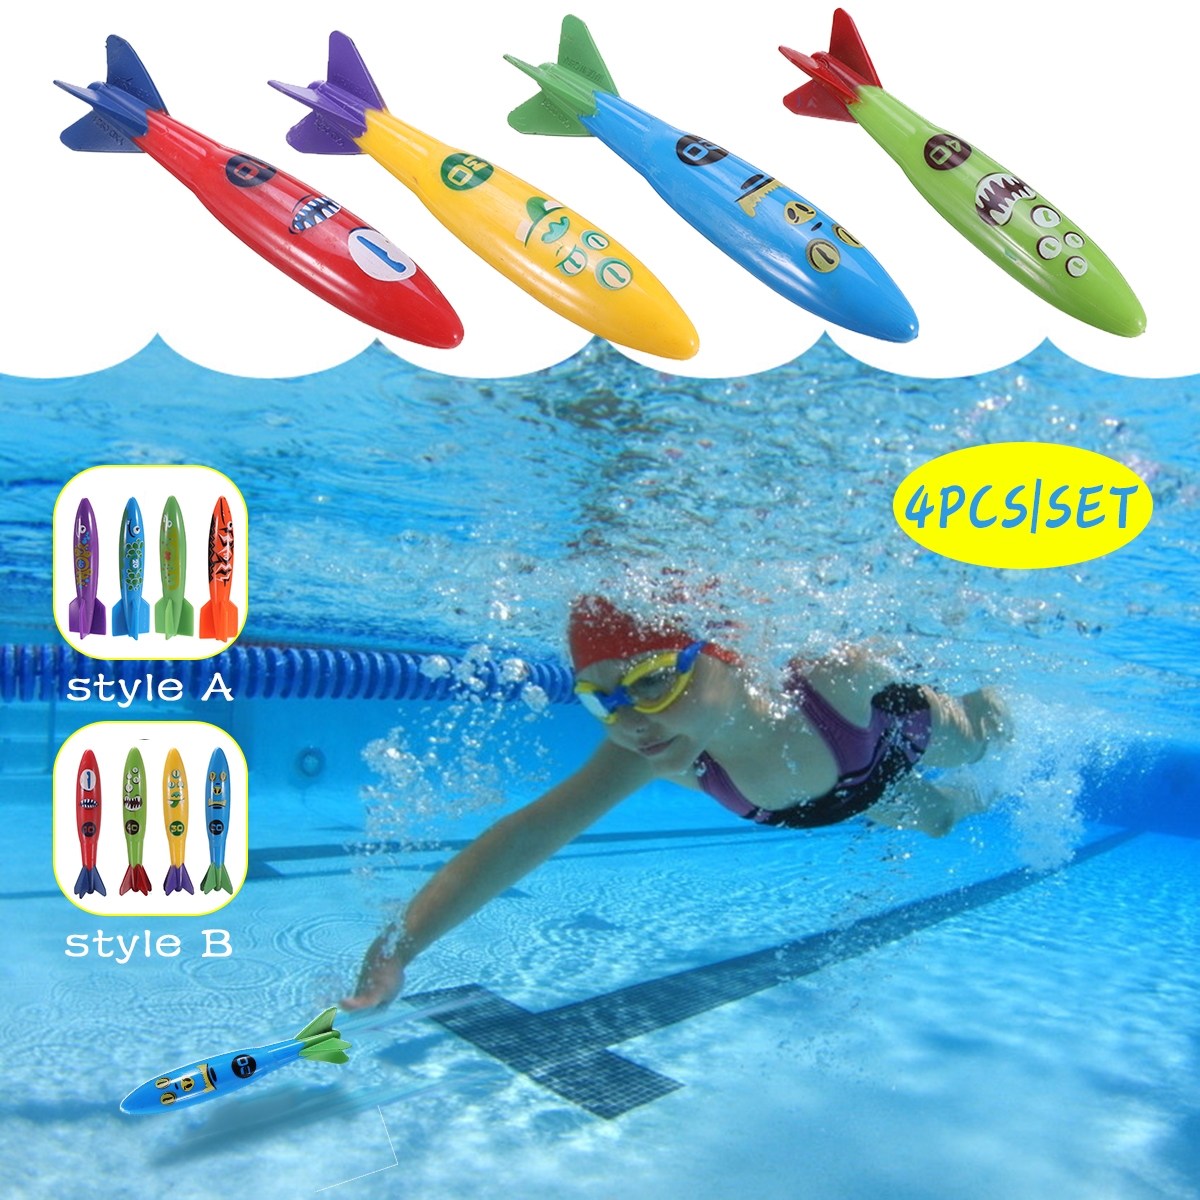 4Pcs Creative Colorful Summer Diving Throwing Rocket Torpedoes Underwater Toys for Children Gift